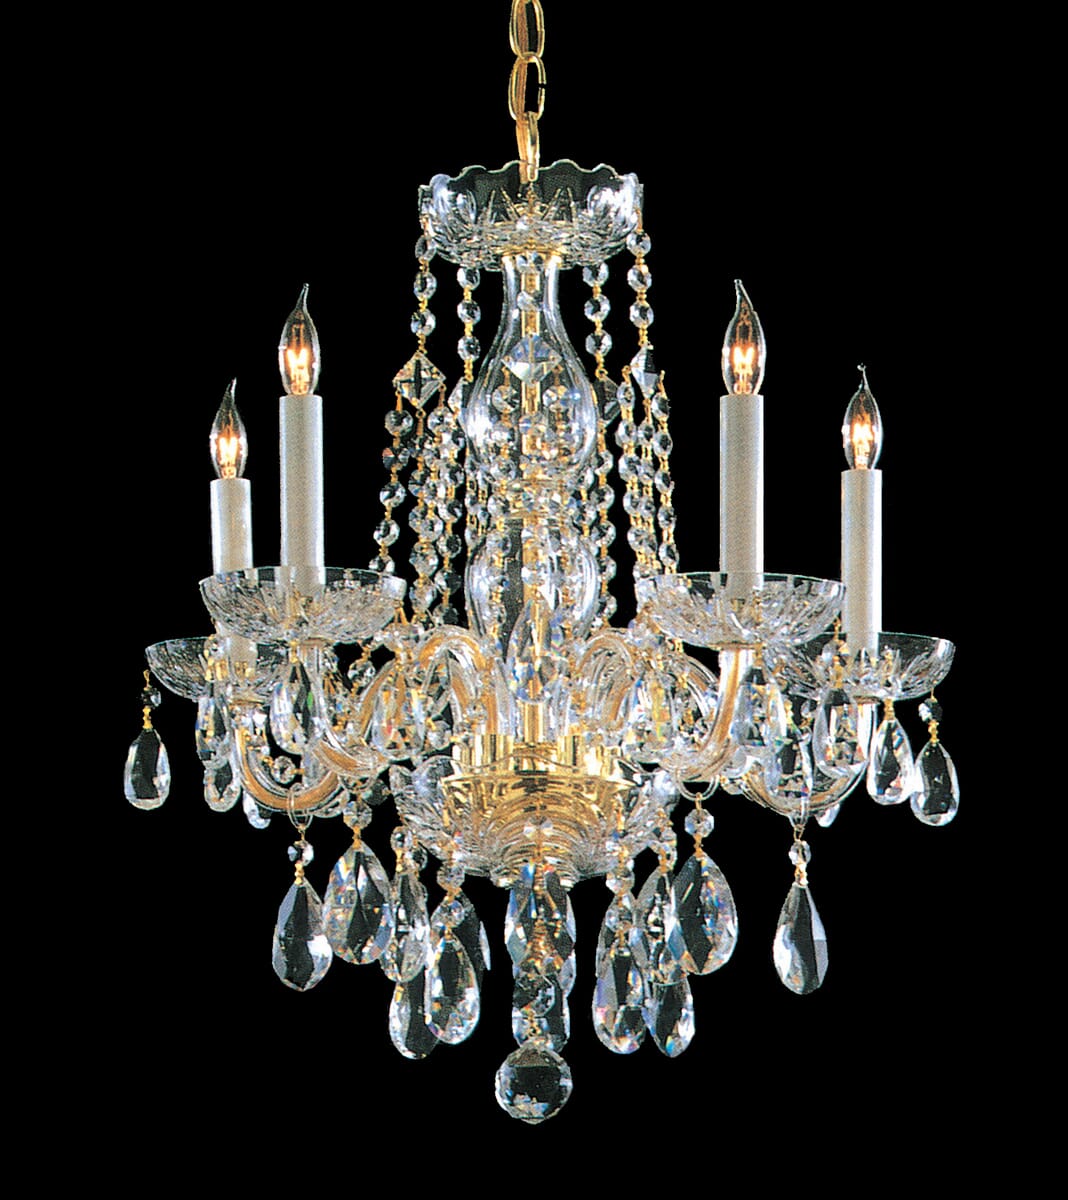 Traditional Crystal 5-Light 20"" Mini Chandelier in Polished Brass with Clear Hand Cut Crystals -  Crystorama, 1061-PB-CL-MWP